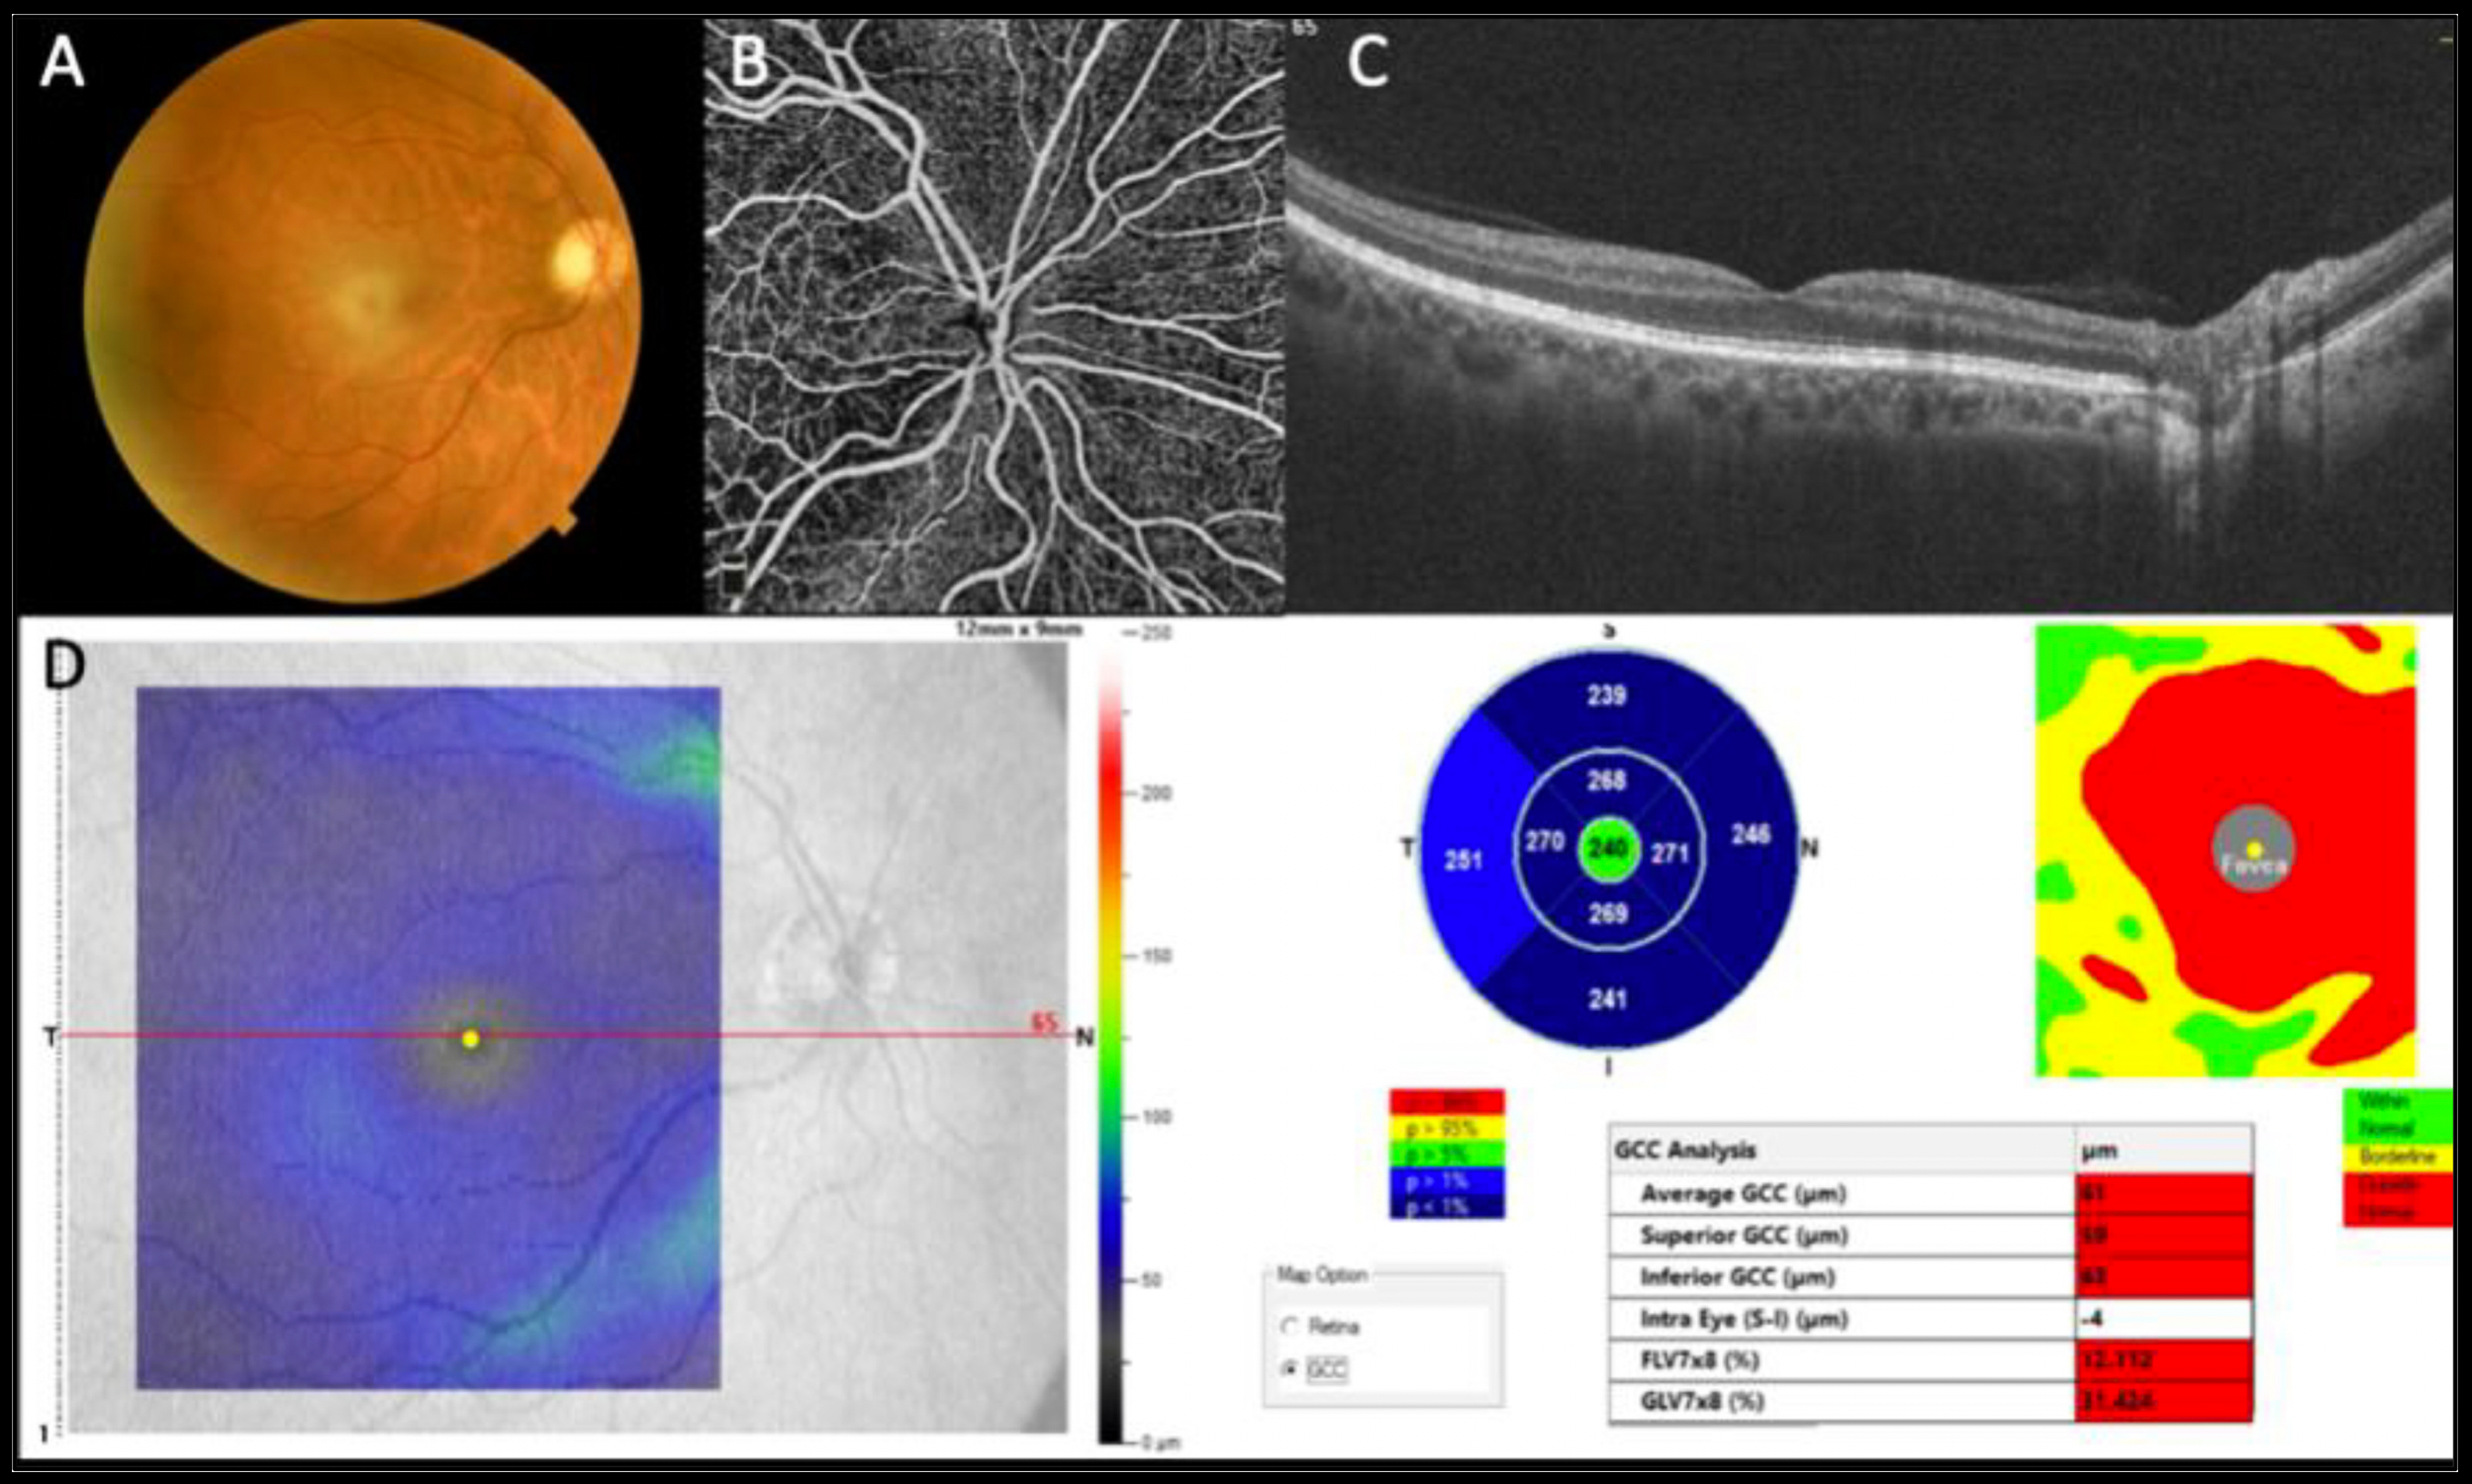 This image from the study shows a normal optic nerve in Fig. (A), wherein the posterior pole and midperiphery shows no severe morphologic changes. However, in Fig. (B) OCT-A reveals a reduction in the deep vascular pattern most evident at the posterior pole and particularly at the interpapillary-macular bundle, and the OCT B-scan in Fig. (C) reveals a reduction in the inner retinal layers where nerve fiber layers are located. In Fig. (D), we see an average reduction in the ganglion cell layer at the posterior pole compared with normative data (blue color map).